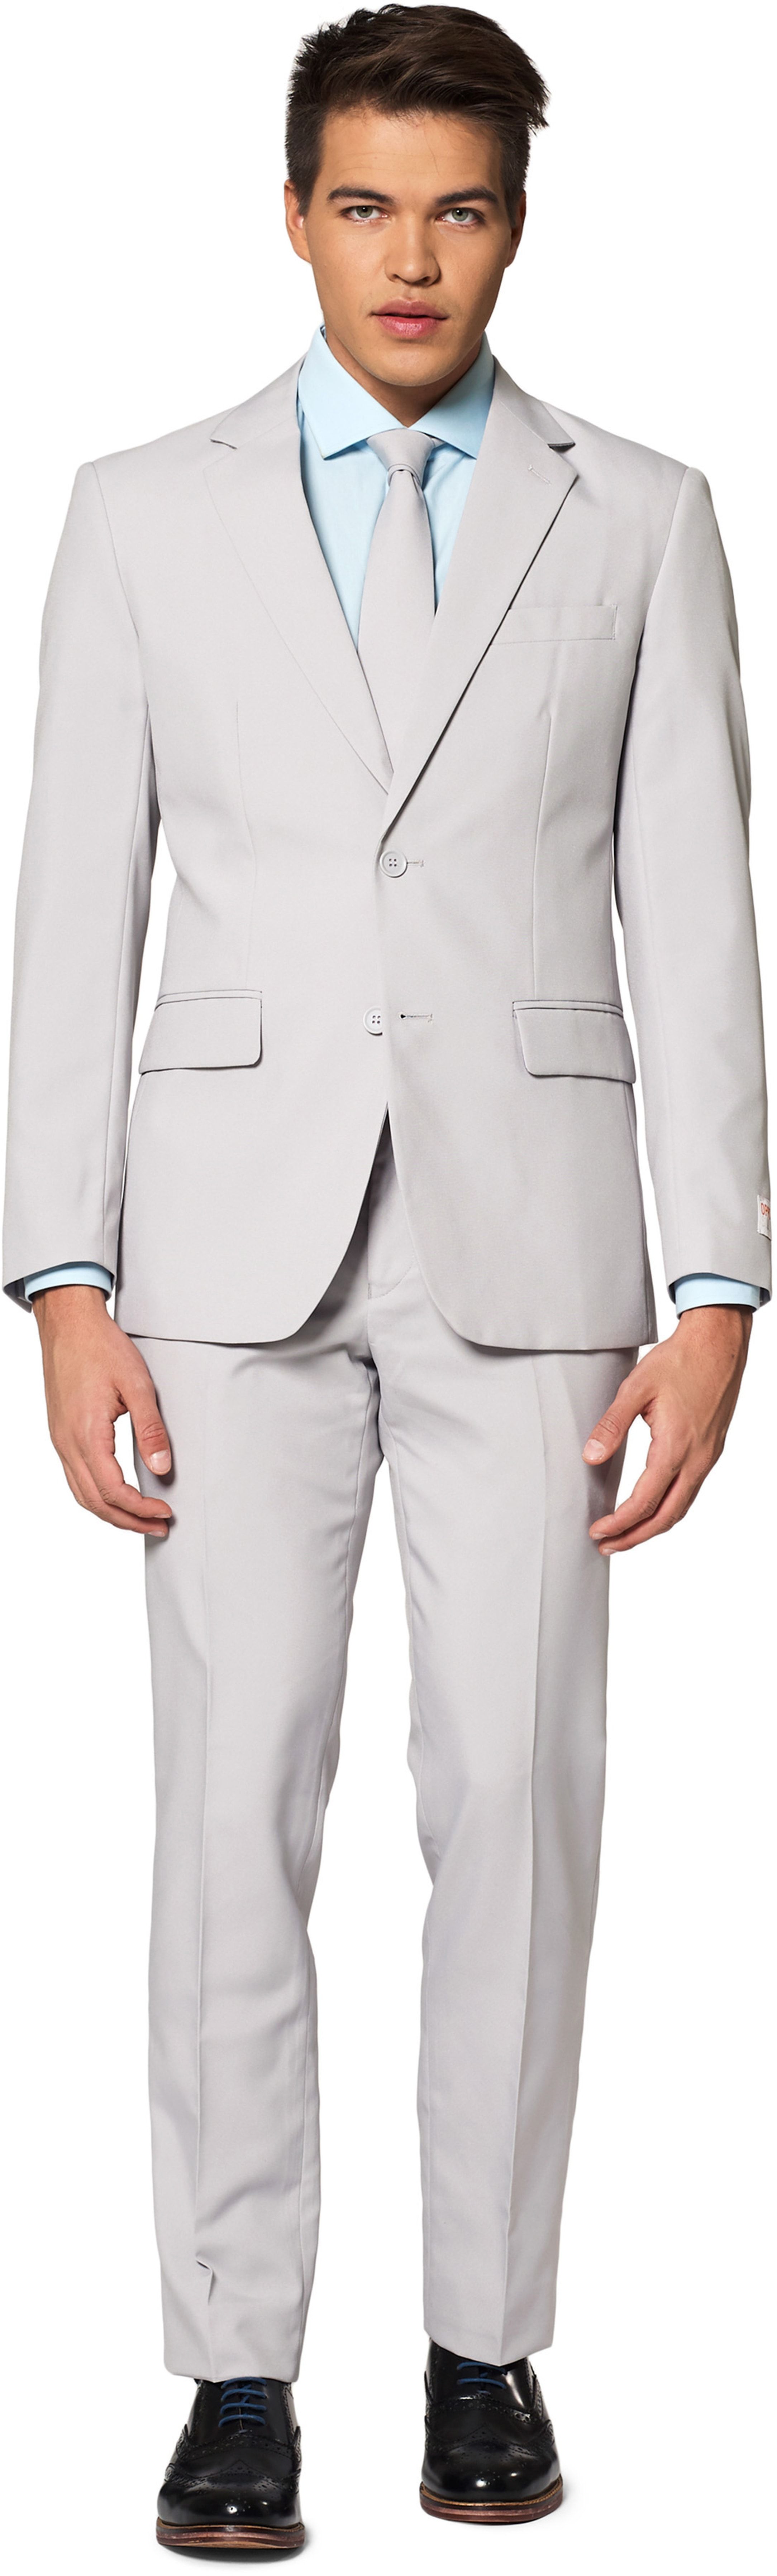 OppoSuits Costume Groovy Gris taille 50